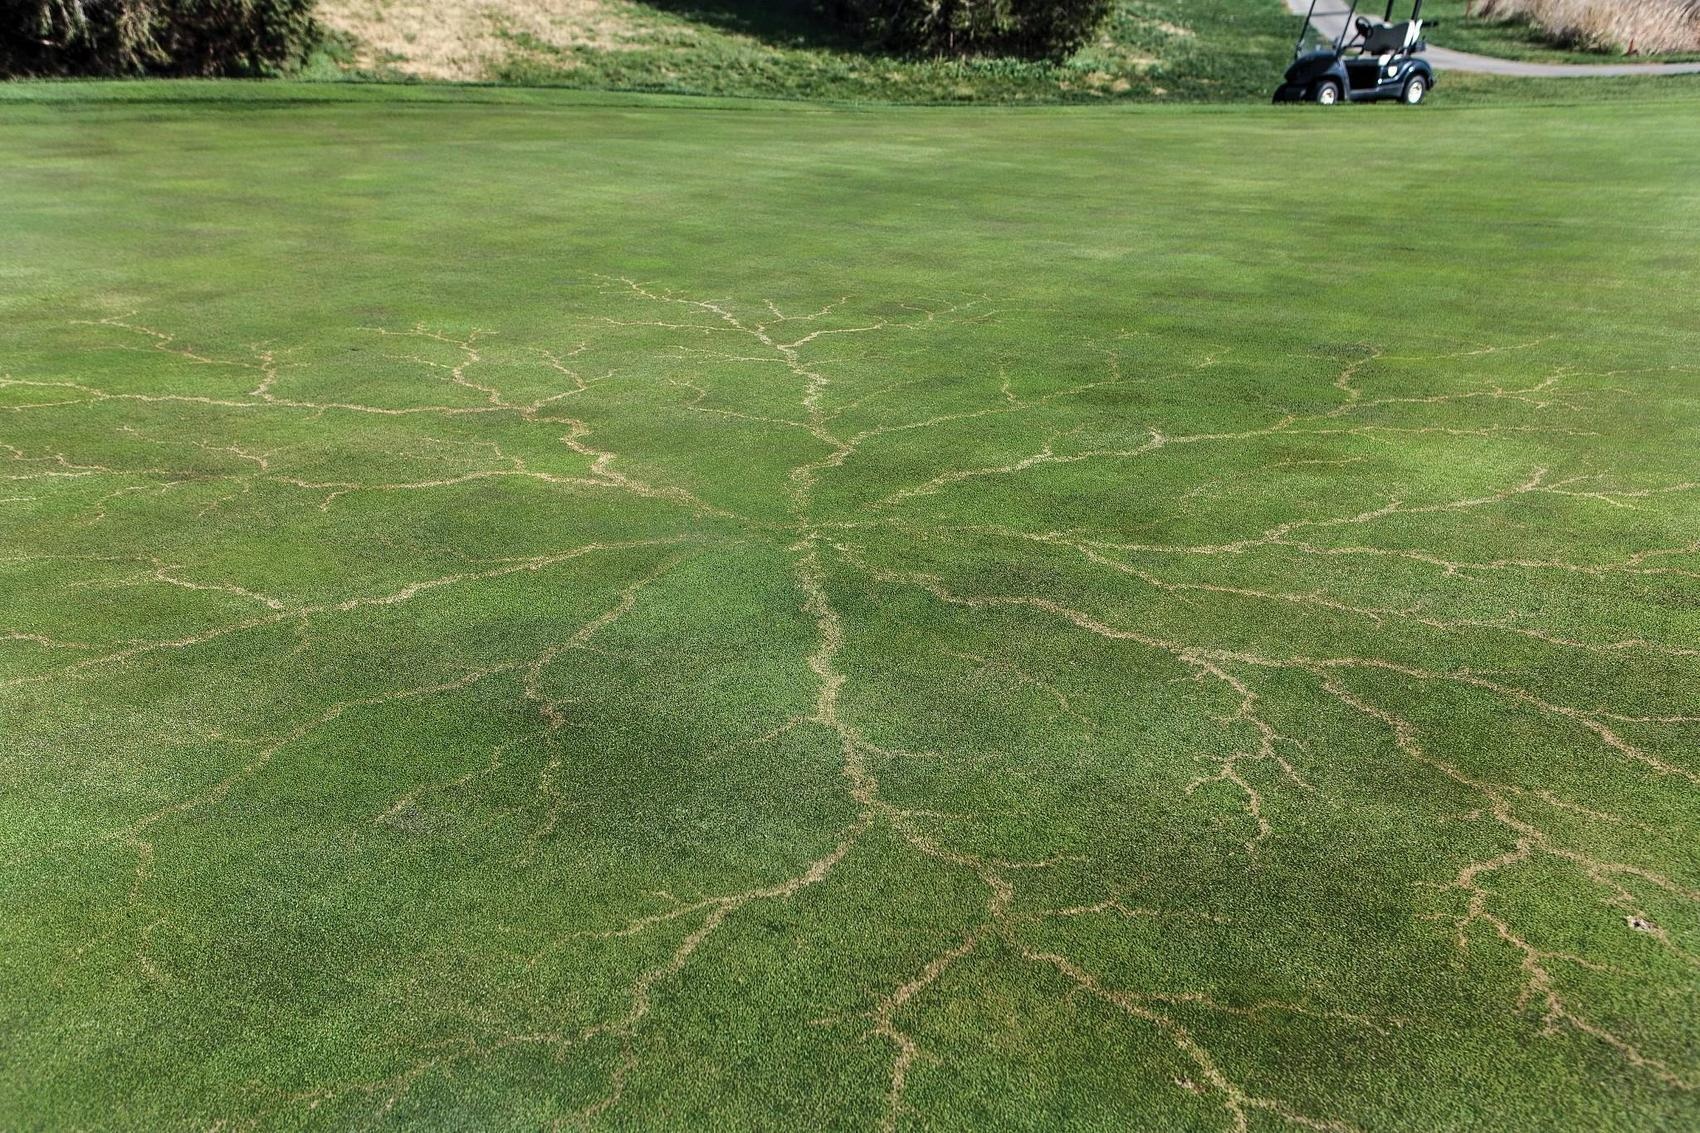 This is what the grass looks like after lightening strikes.